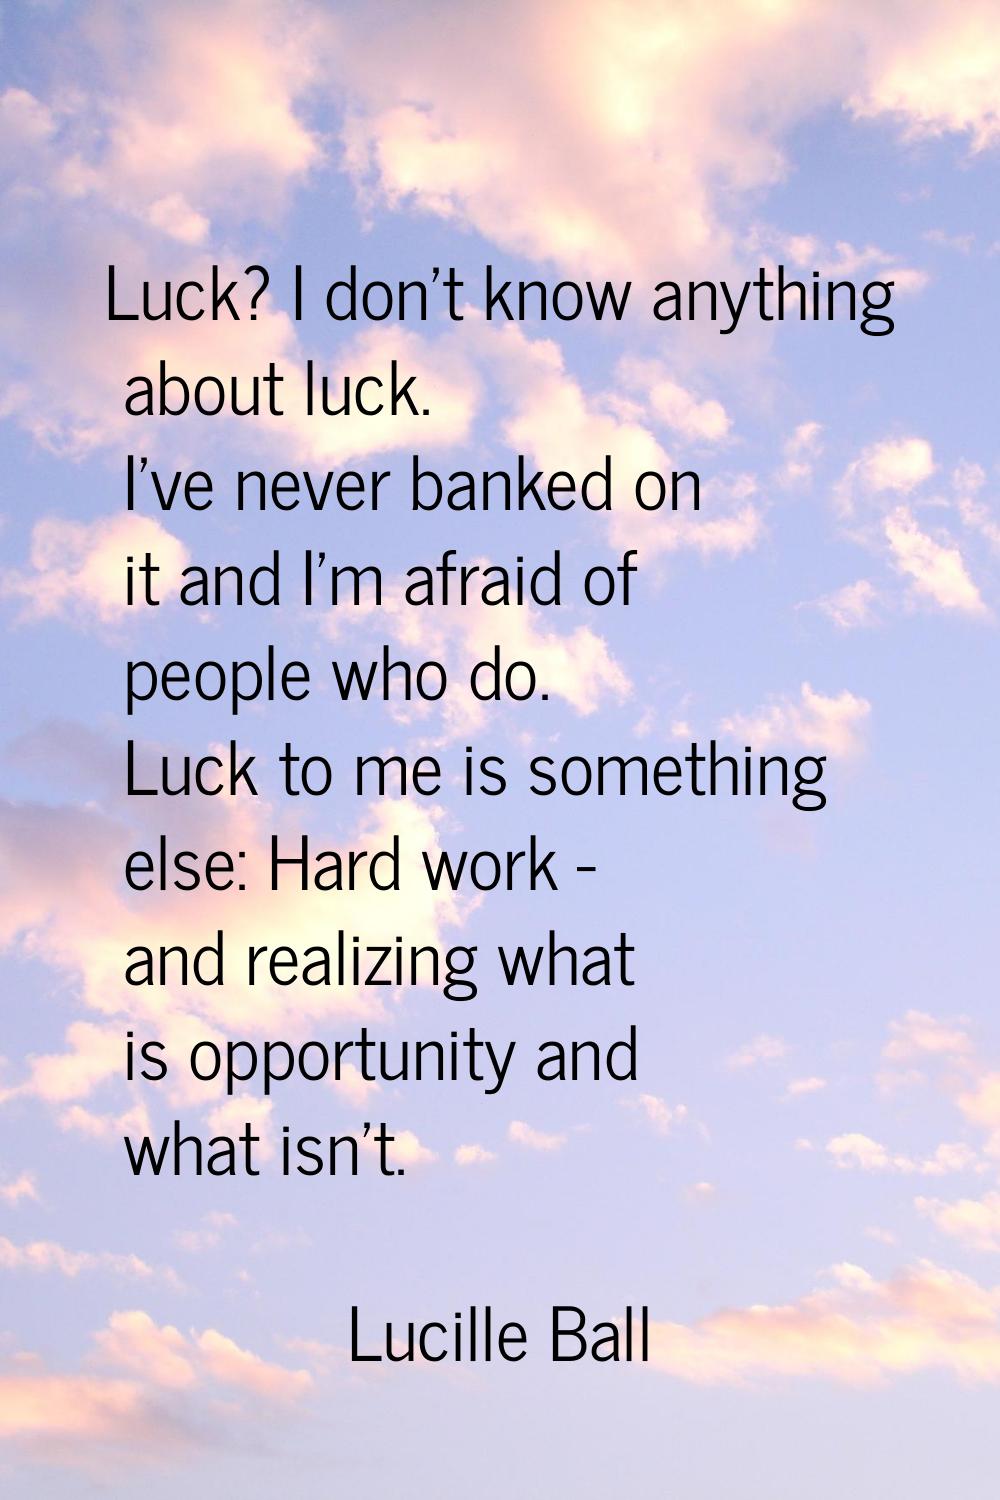 Luck? I don't know anything about luck. I've never banked on it and I'm afraid of people who do. Lu